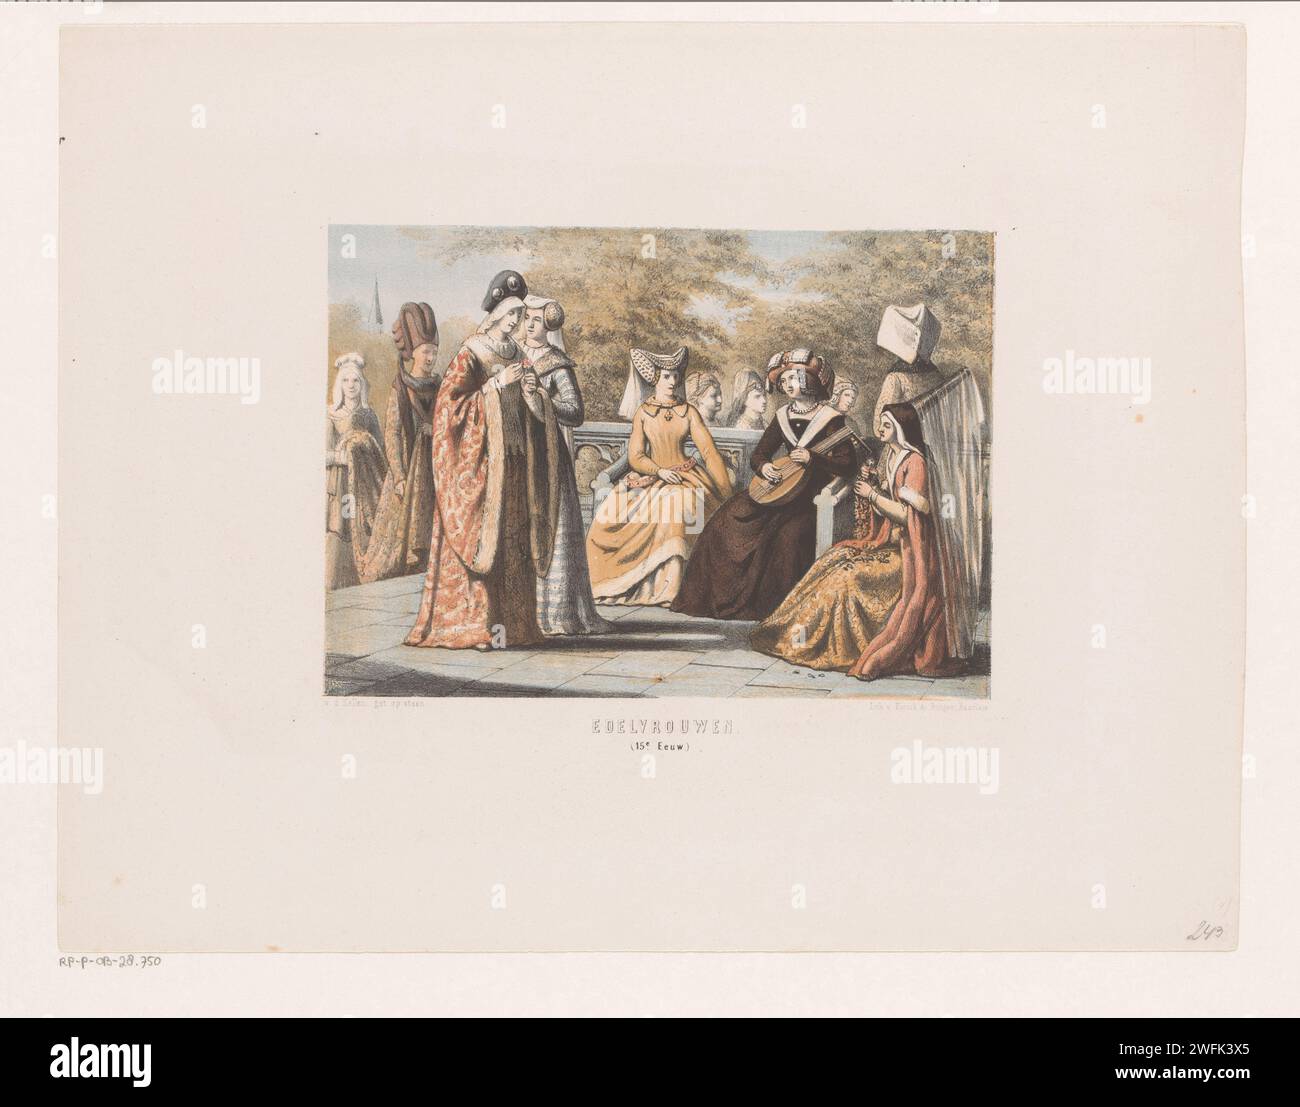 Edelvrouwen in the fifteenth century, David van der Kellen (1827-1895), 1859 - 1864 print The red women are outside. On the right is a woman with a flower wreath and a pointed hat with drag. She receives a woman with a flower addressed by another woman. A woman with a maid is waiting behind it. Haarlem paper  nobility and patriciate; chivalry, knighthood. audition; ruler giving audience - BB - female ruler. lute, and special forms of lute, e.g.: theorbo. cut flowers; nosegay, bunch of flowers. garland, wreath Stock Photo